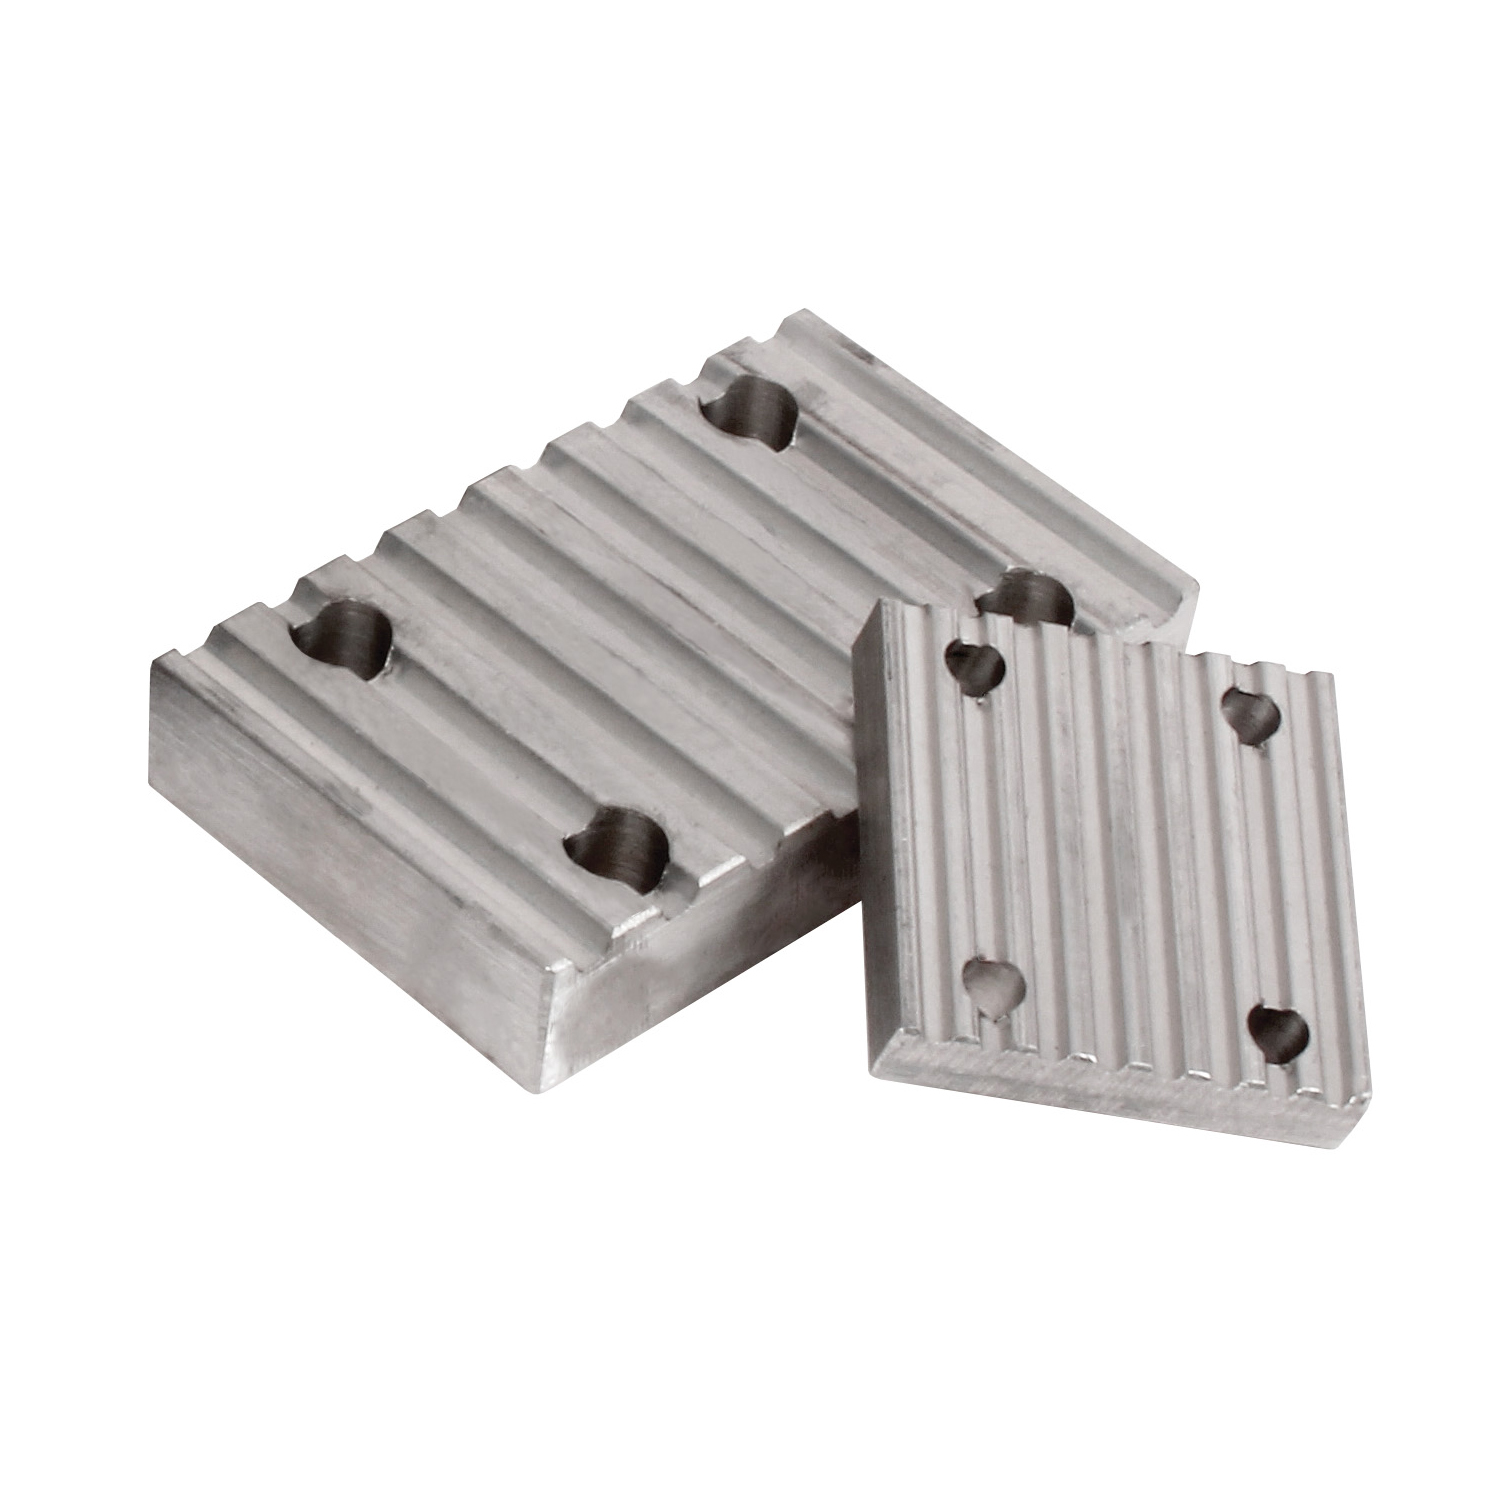 Connecting plate for T type timing belts - T10 - 25mm - T